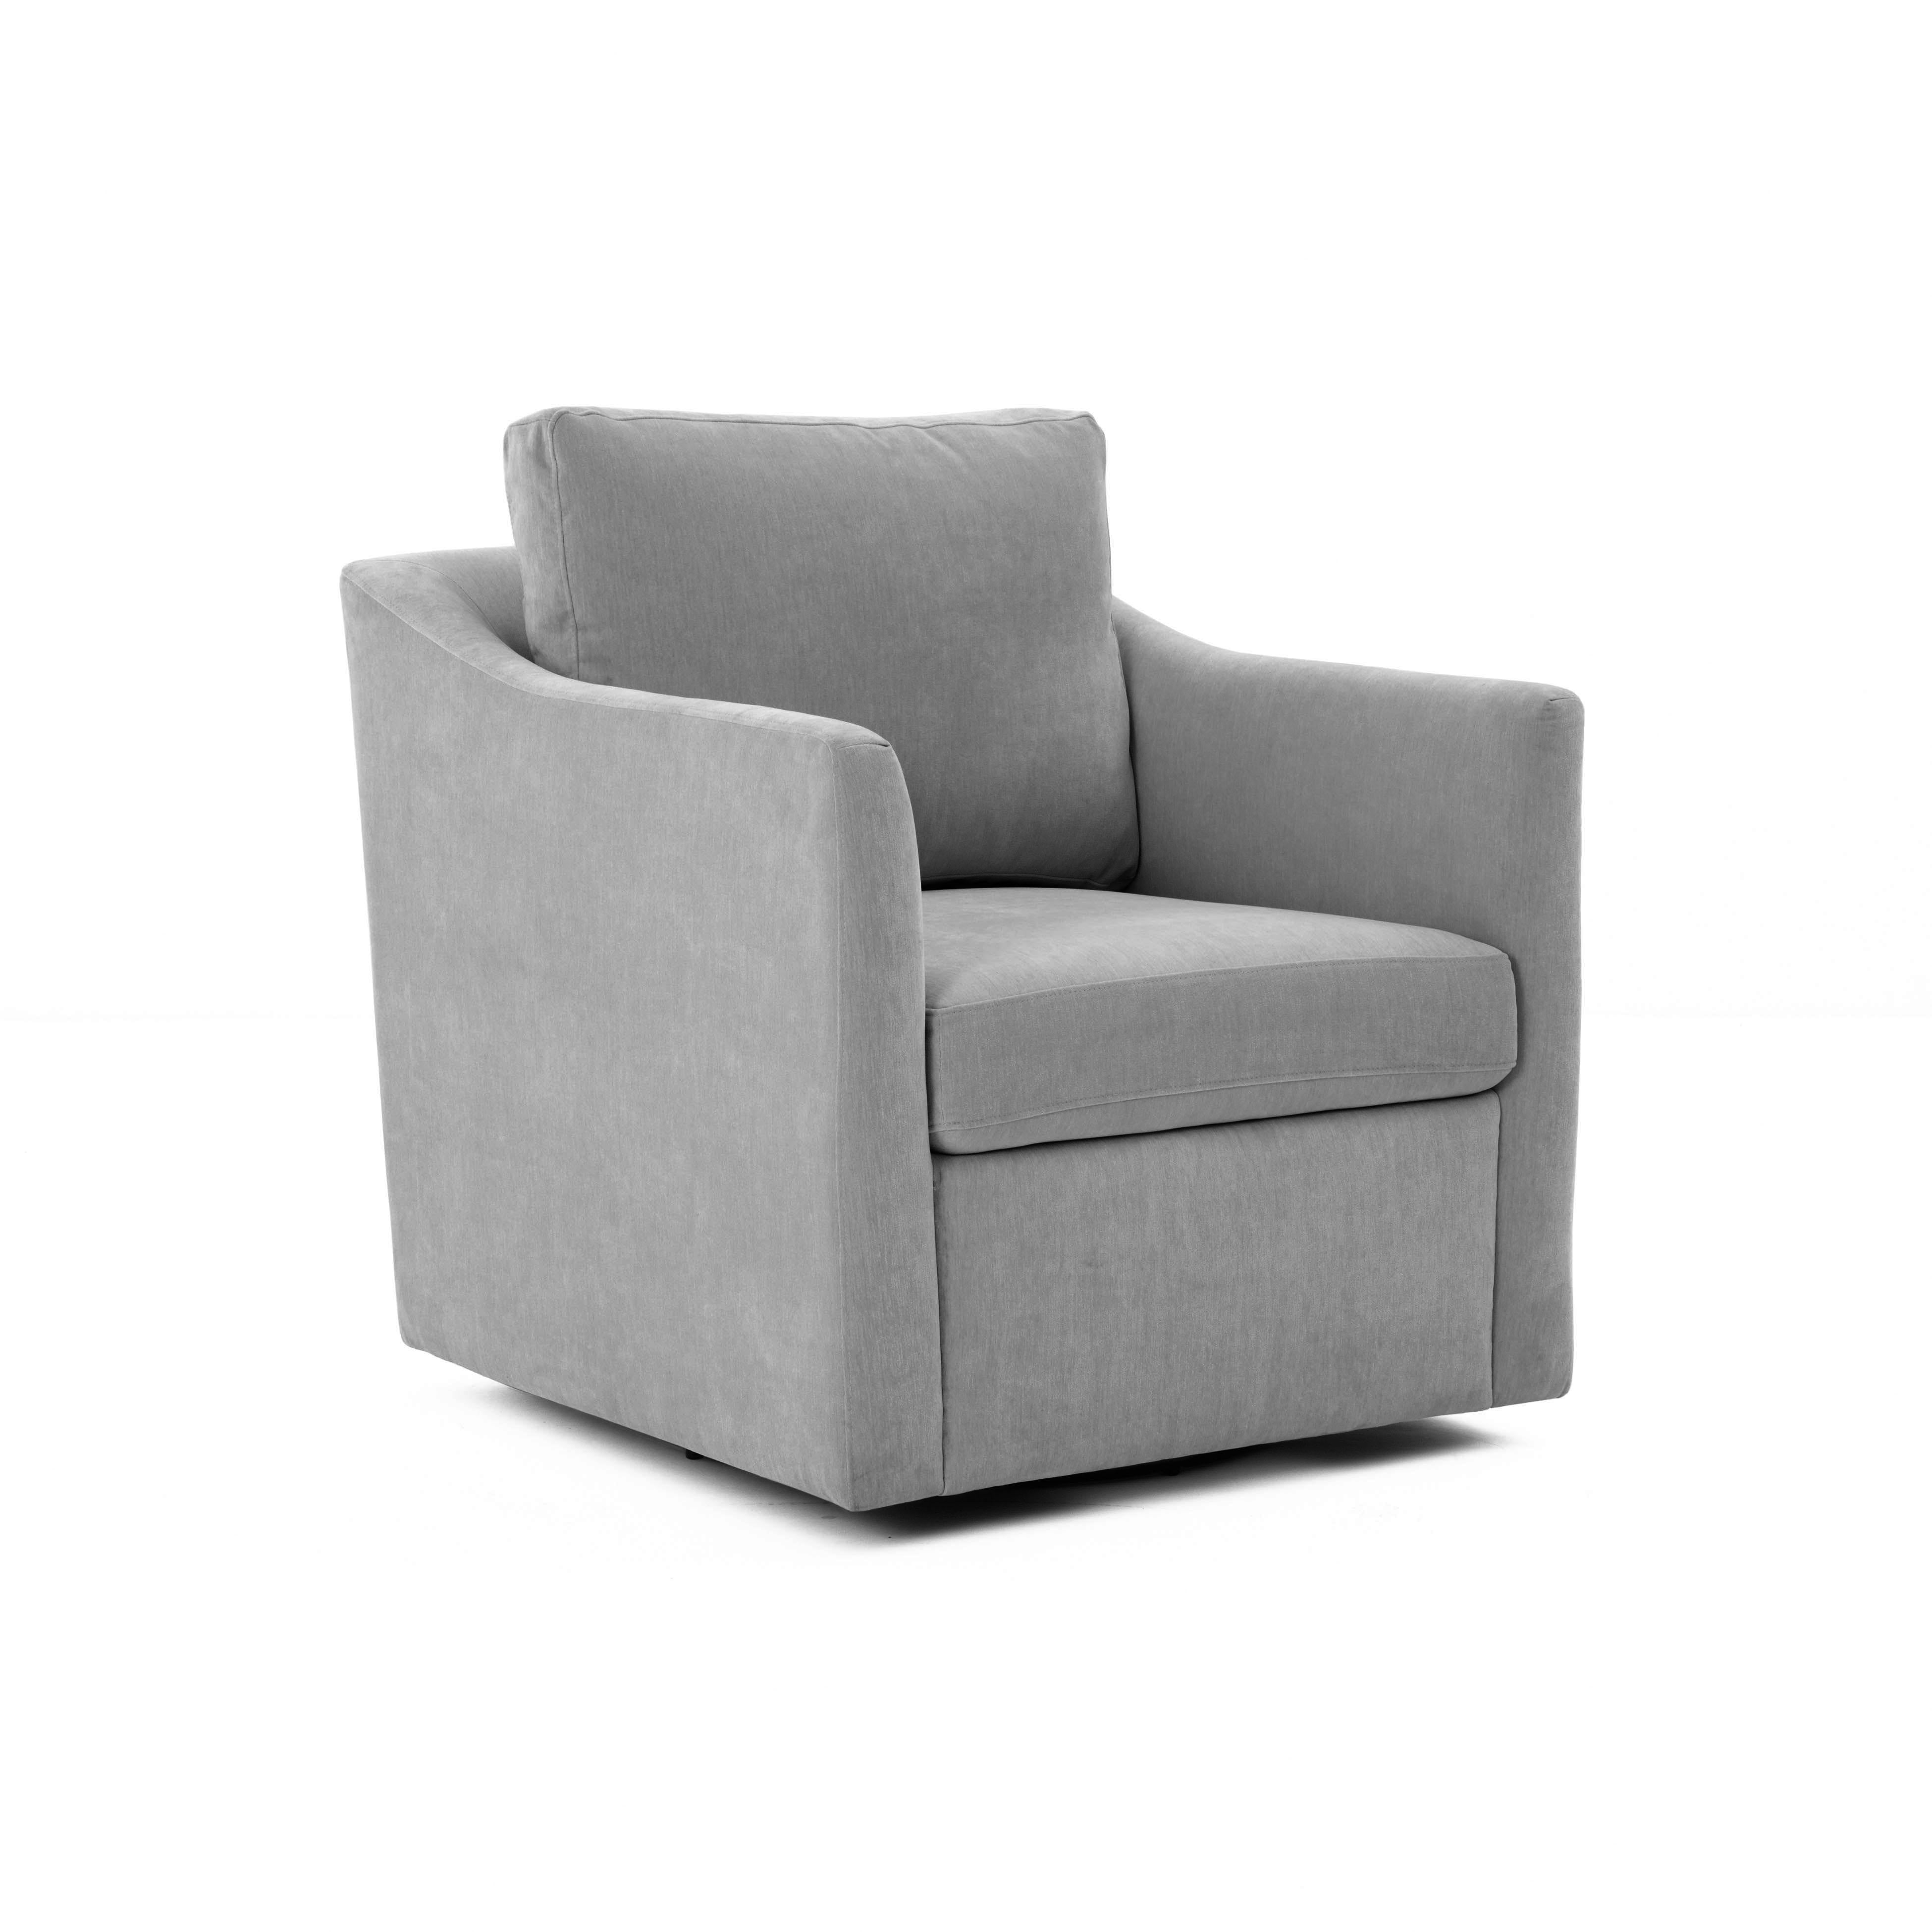 Tov Furniture Accent Chairs - Aiden Gray Swivel Armchair